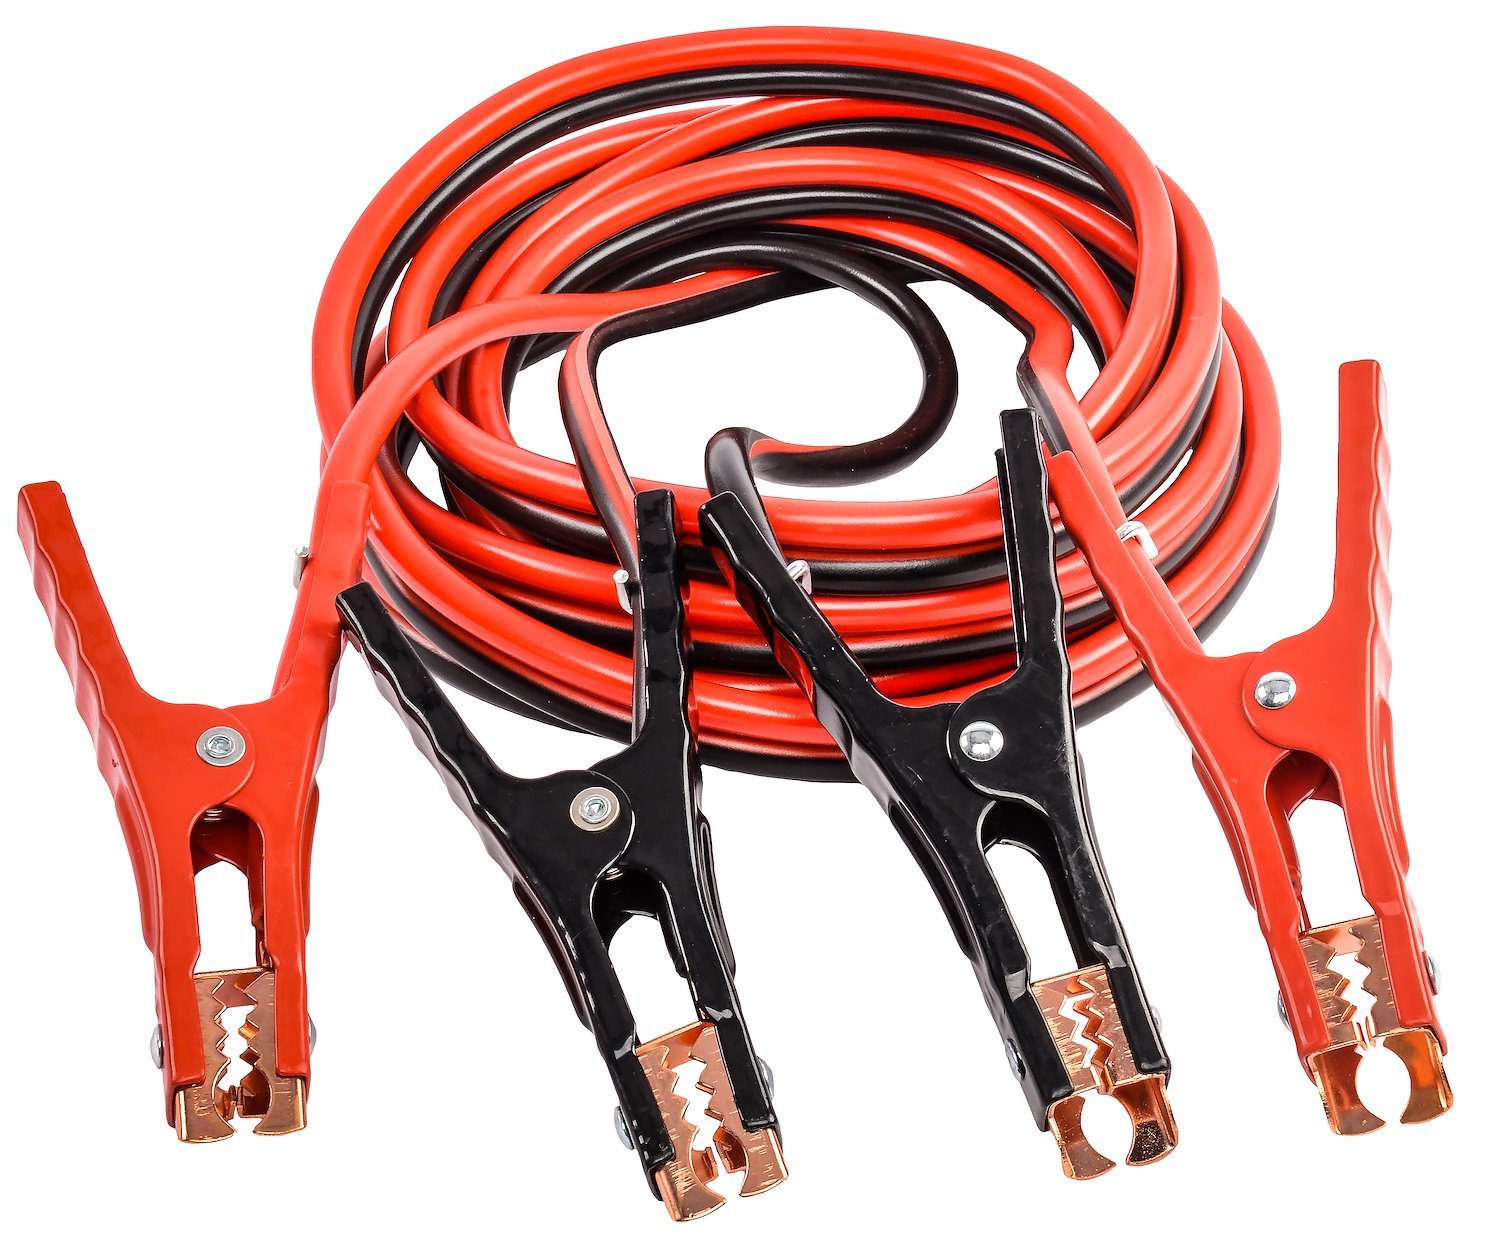 High Quality 16 ft. Jumper Cables [4-Gauge 500-Amp Rated]